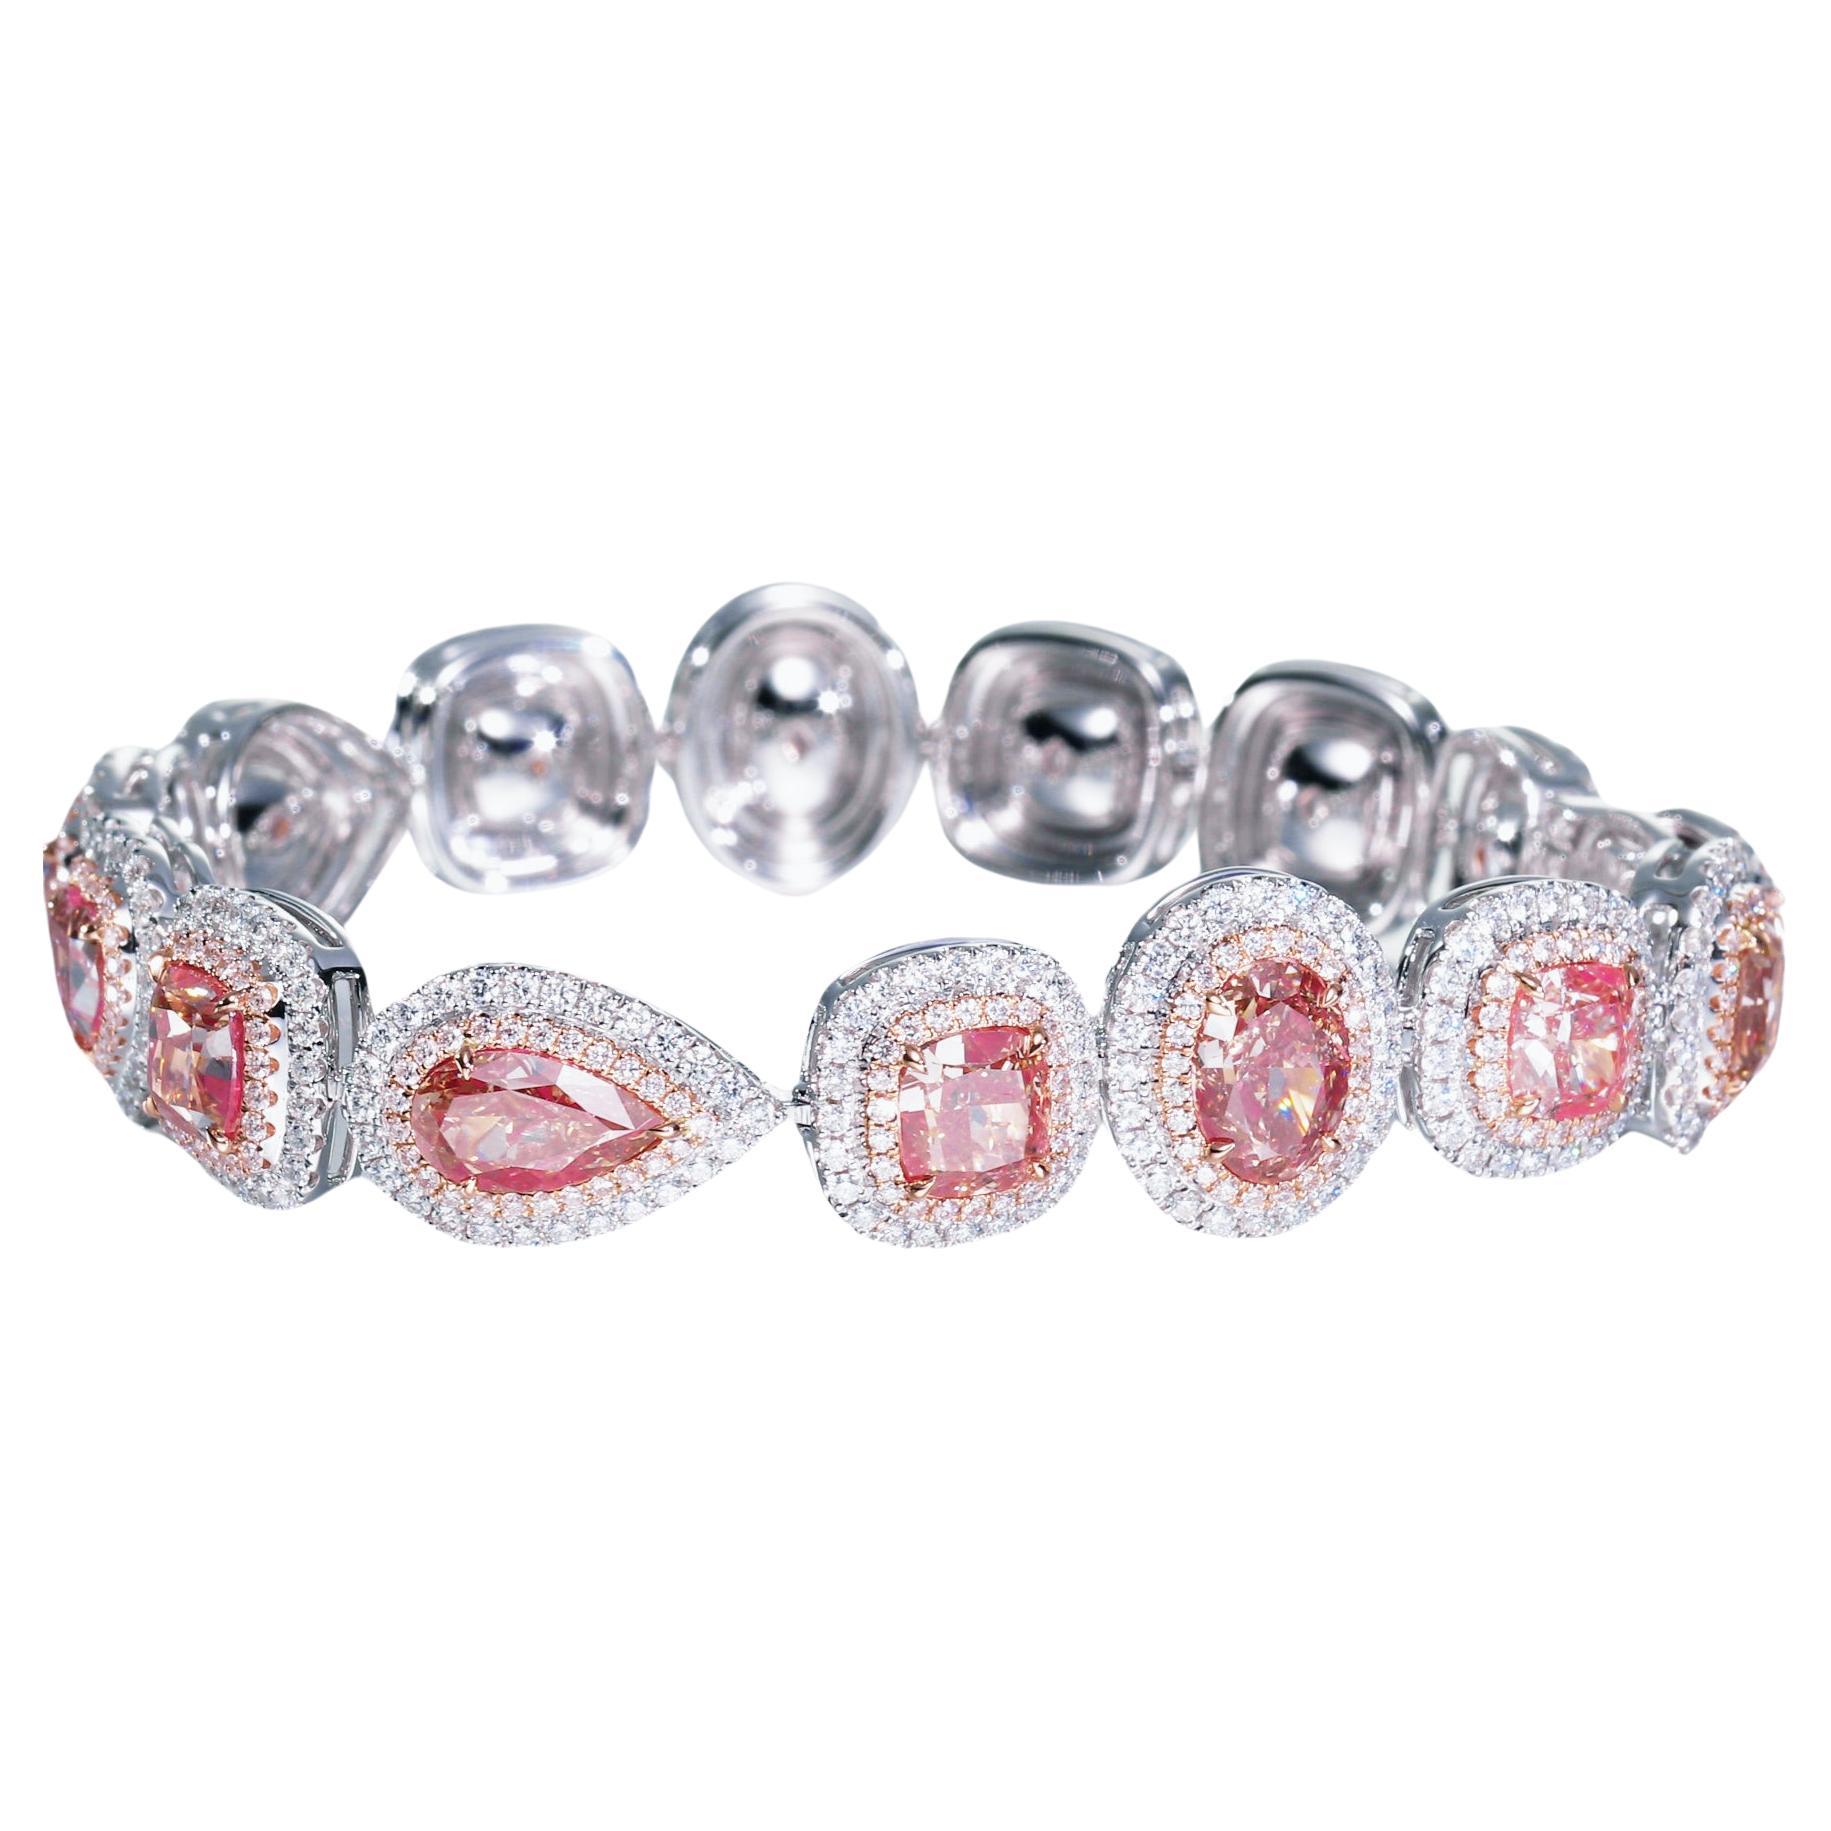 GIA Certified, 25Pcs Natural Pink Diamond Mix Shapes Bracelet in 18KT GOLD. For Sale